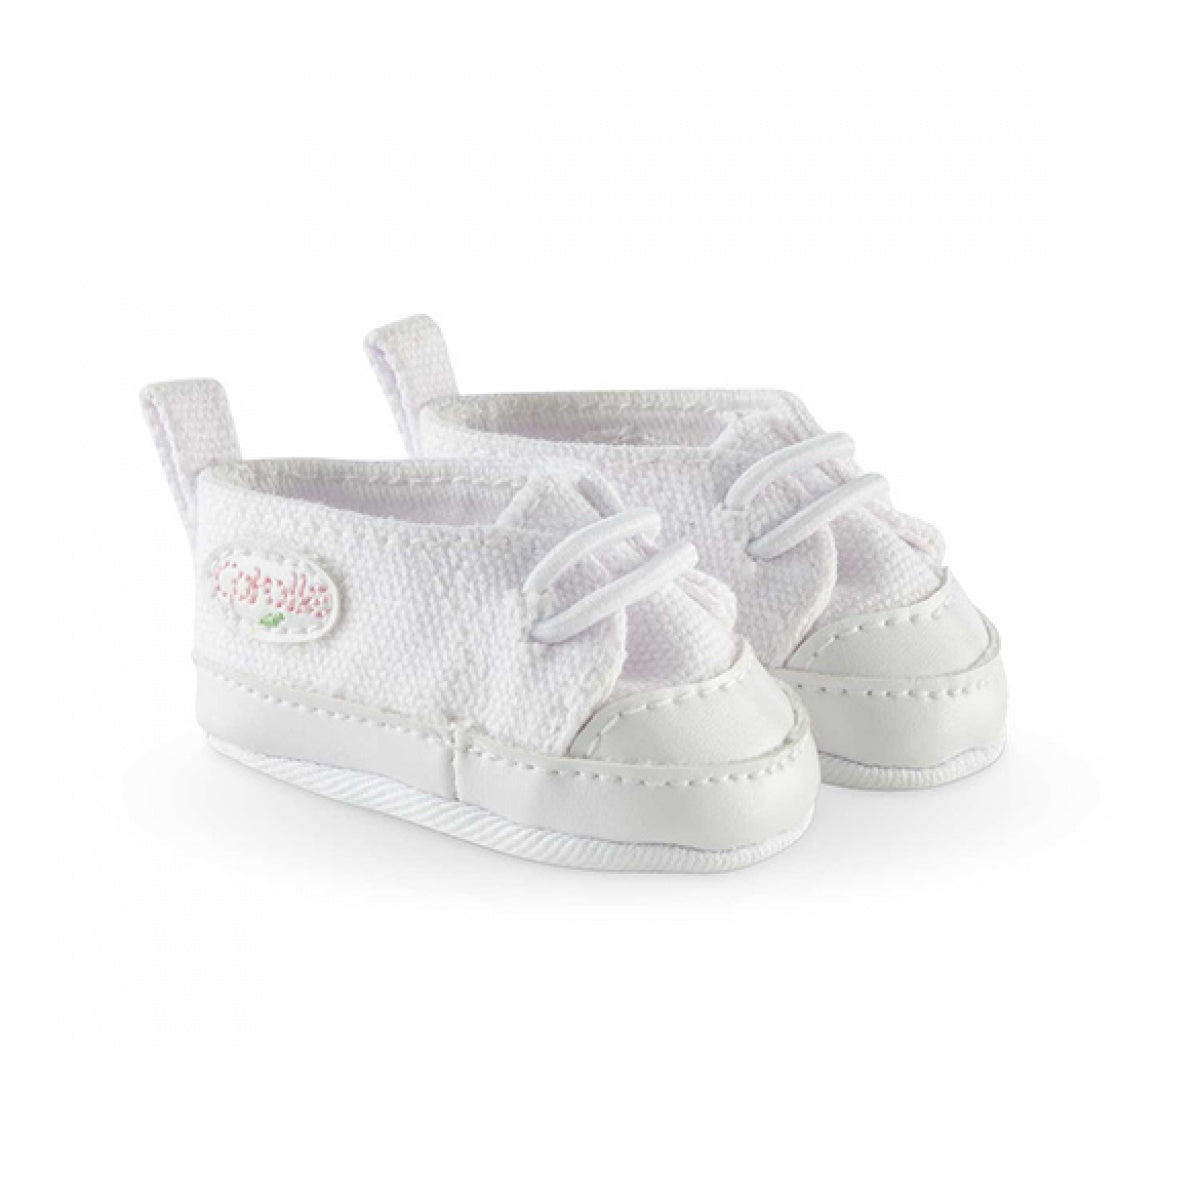 COROLLE - MON CLASSIQUE - Clothing - Doll Shoes Sneakers White -  Baby 36cm”